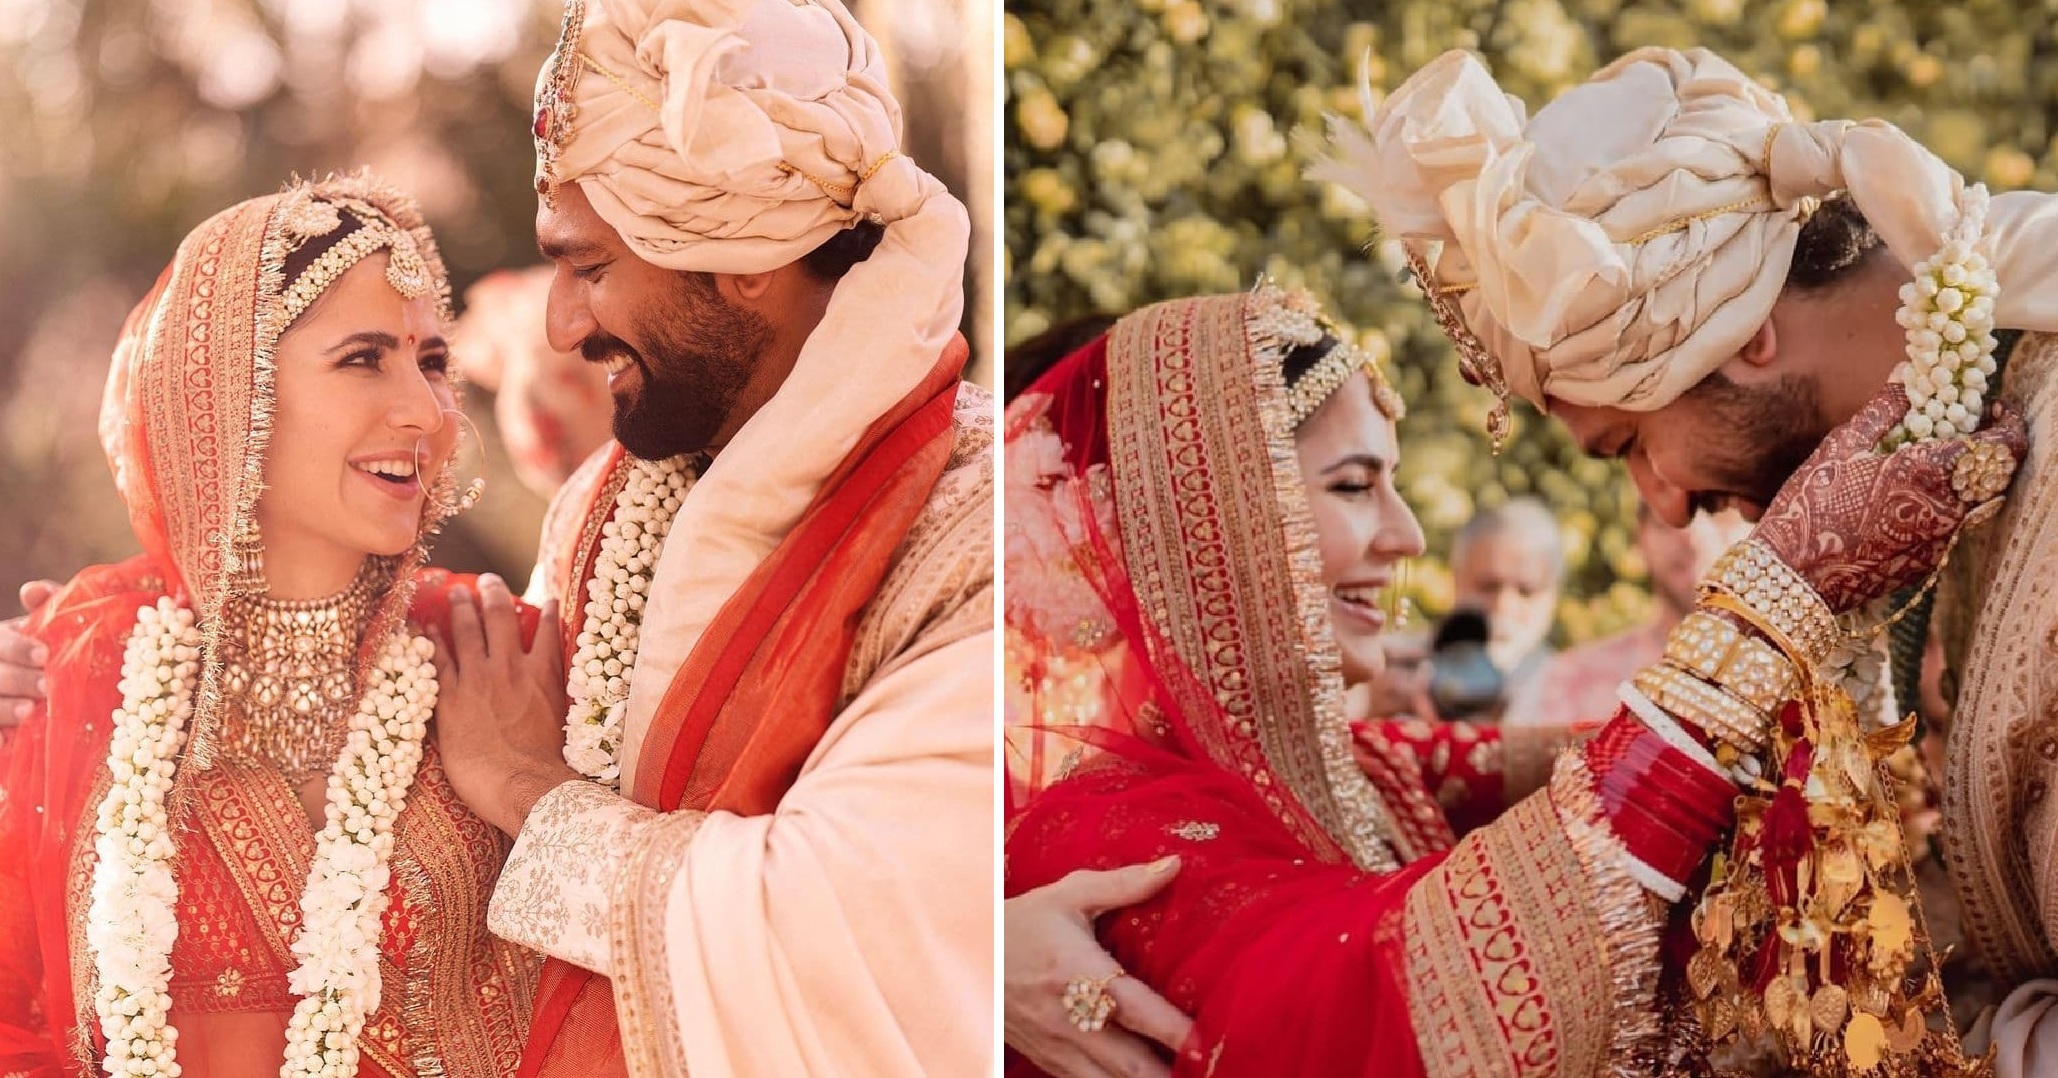 Here Are The First Pictures From Vicky Kaushal & Katrina Kaif’s Lavish Wedding Ceremony [Pics & Videos]